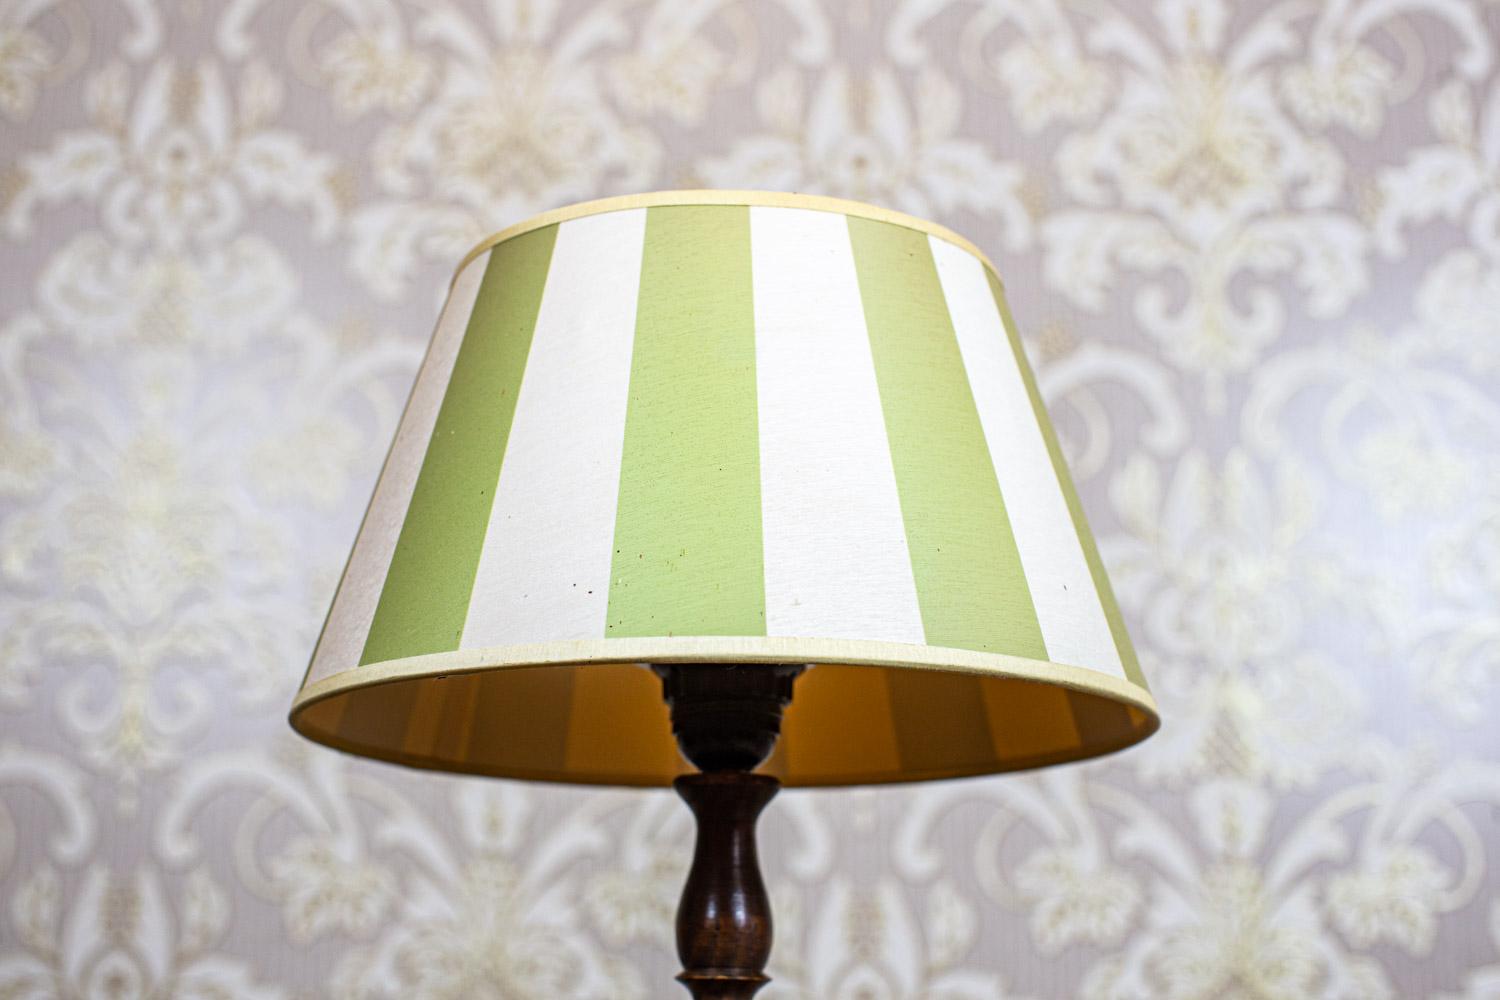 European Electric Table Lamp From the Late 20th Century with Green-White Shade For Sale